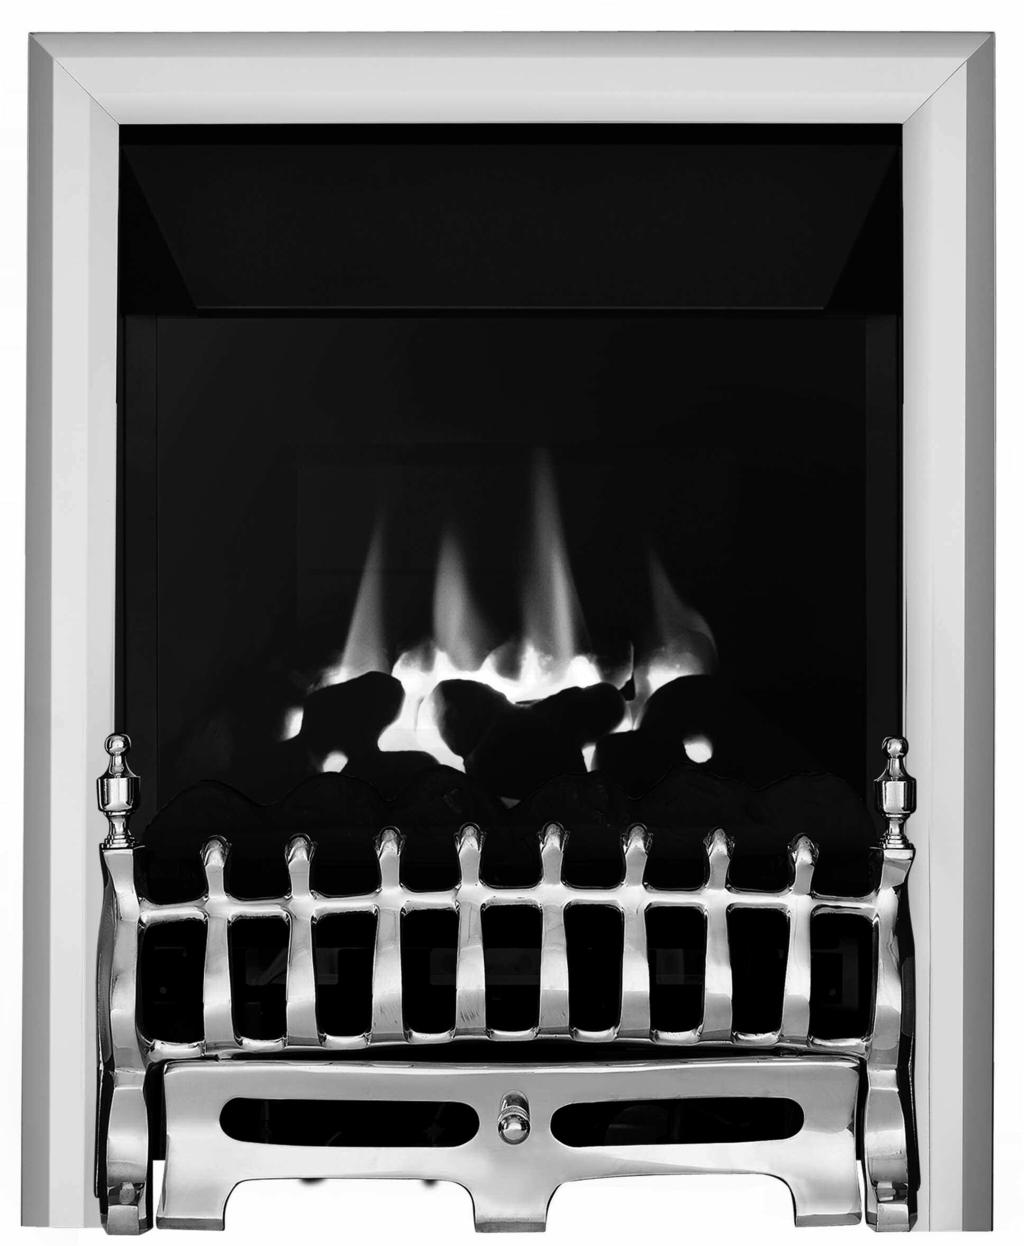 KM579168 MODEL SHOWN: BLENHEIM HE GAS FIRE Questions or problems with your appliance?